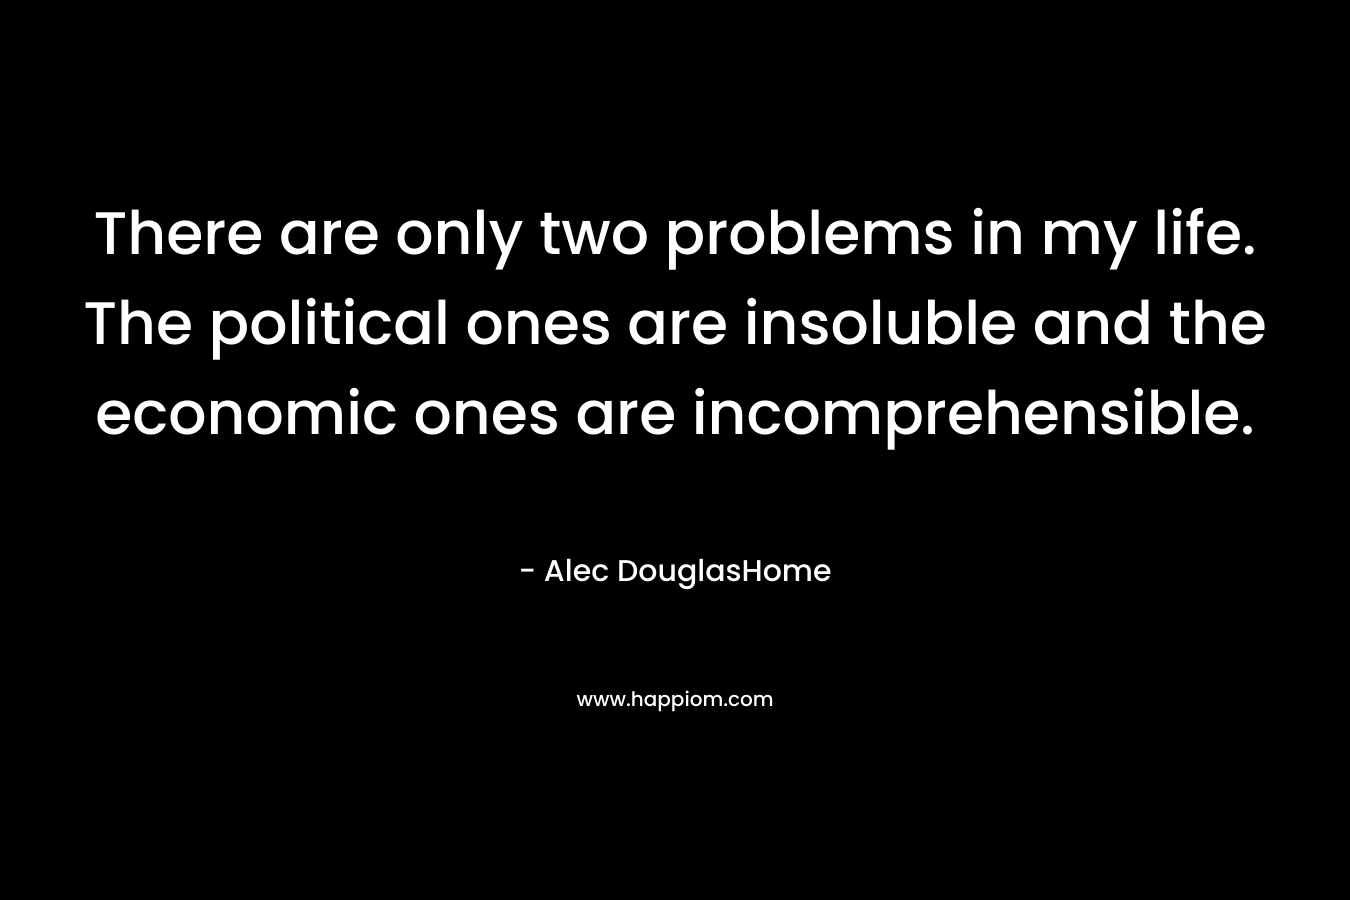 There are only two problems in my life. The political ones are insoluble and the economic ones are incomprehensible.